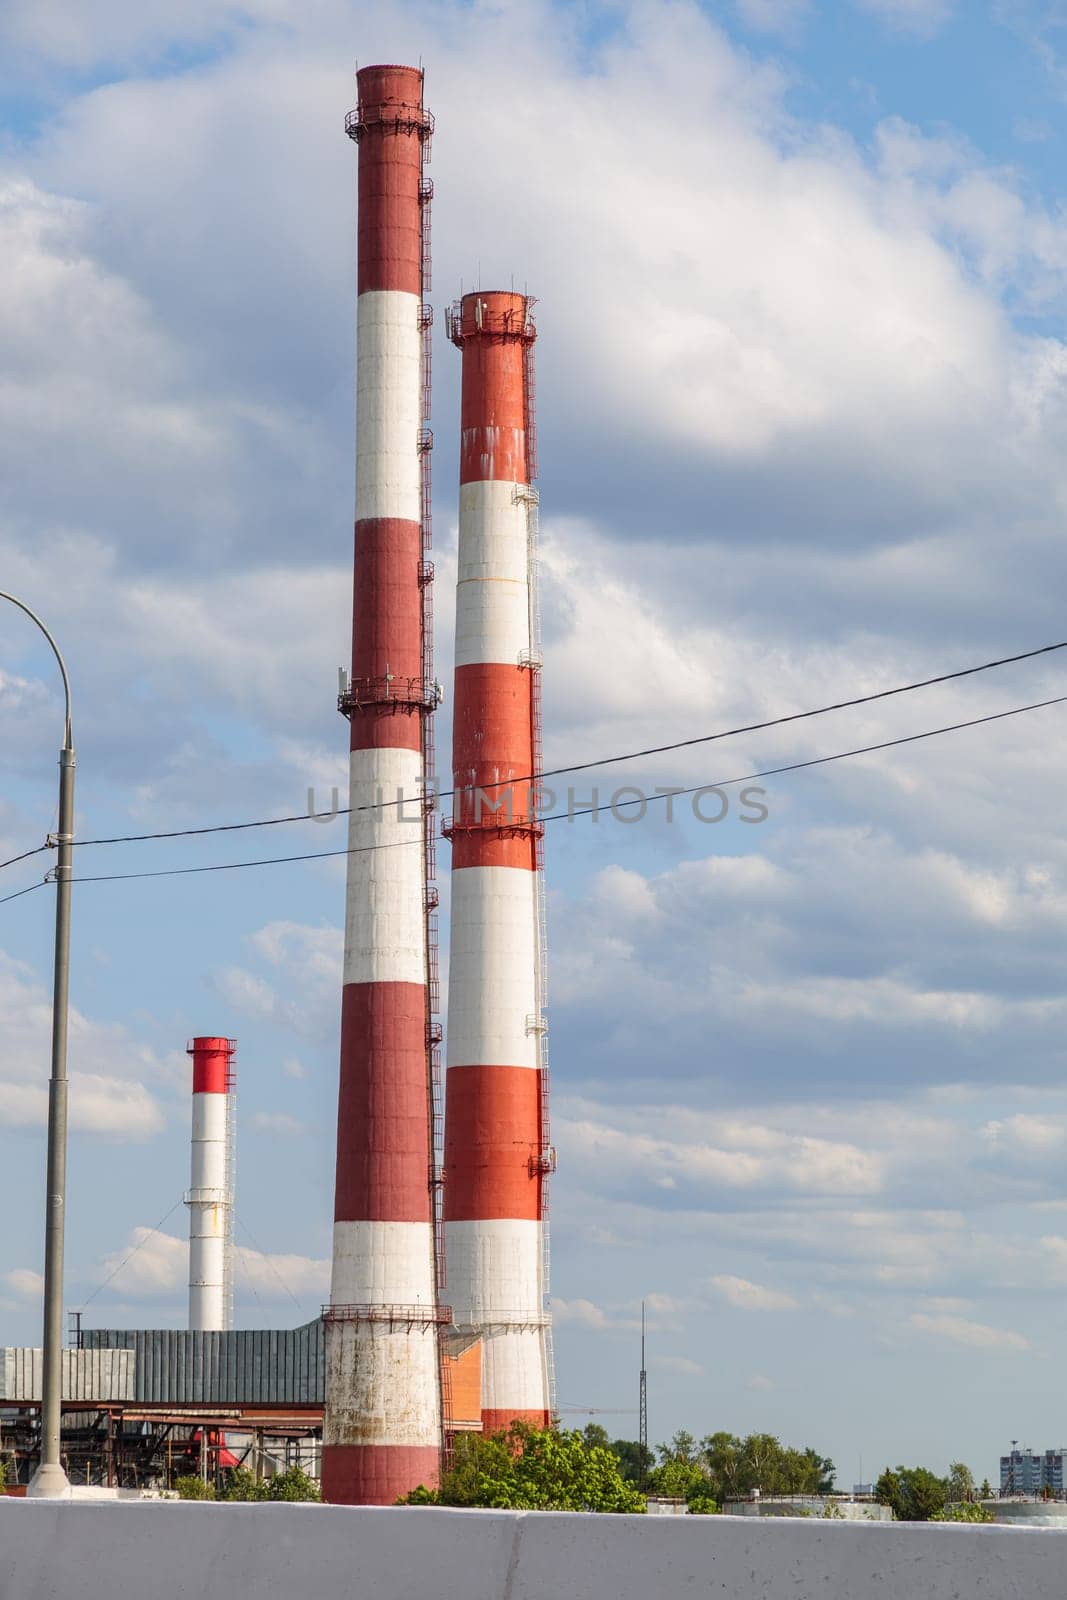 Industrial plant with tall chimneys against the blue sky. by Yurich32